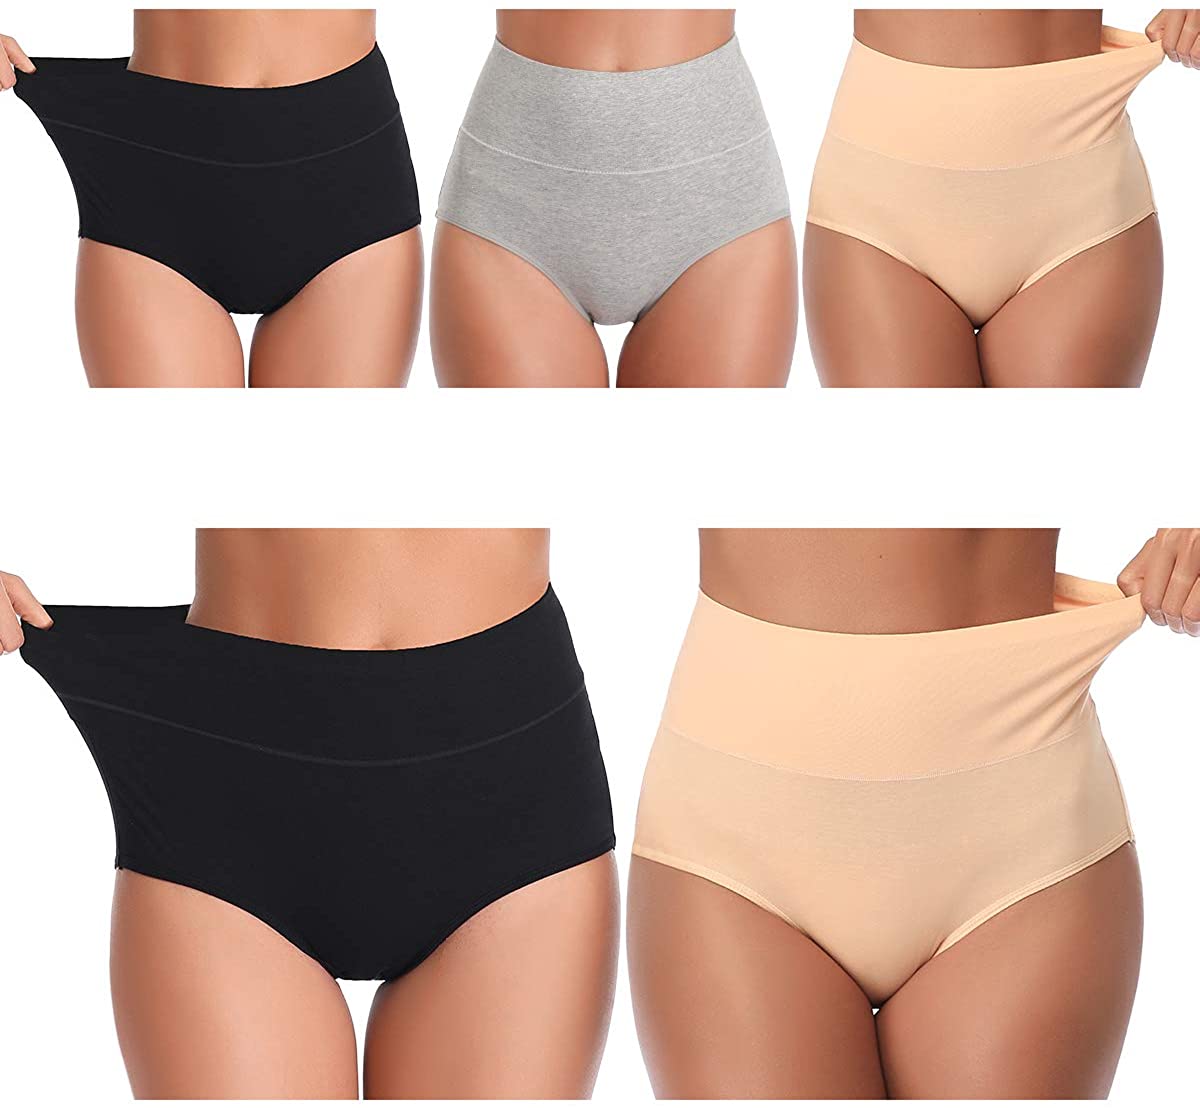 compression underwear for women  wirarpa Women's Cotton High Waisted Compression  Panties Full Coverage Brief Underwear Tummy Control Knickers 4 Pack